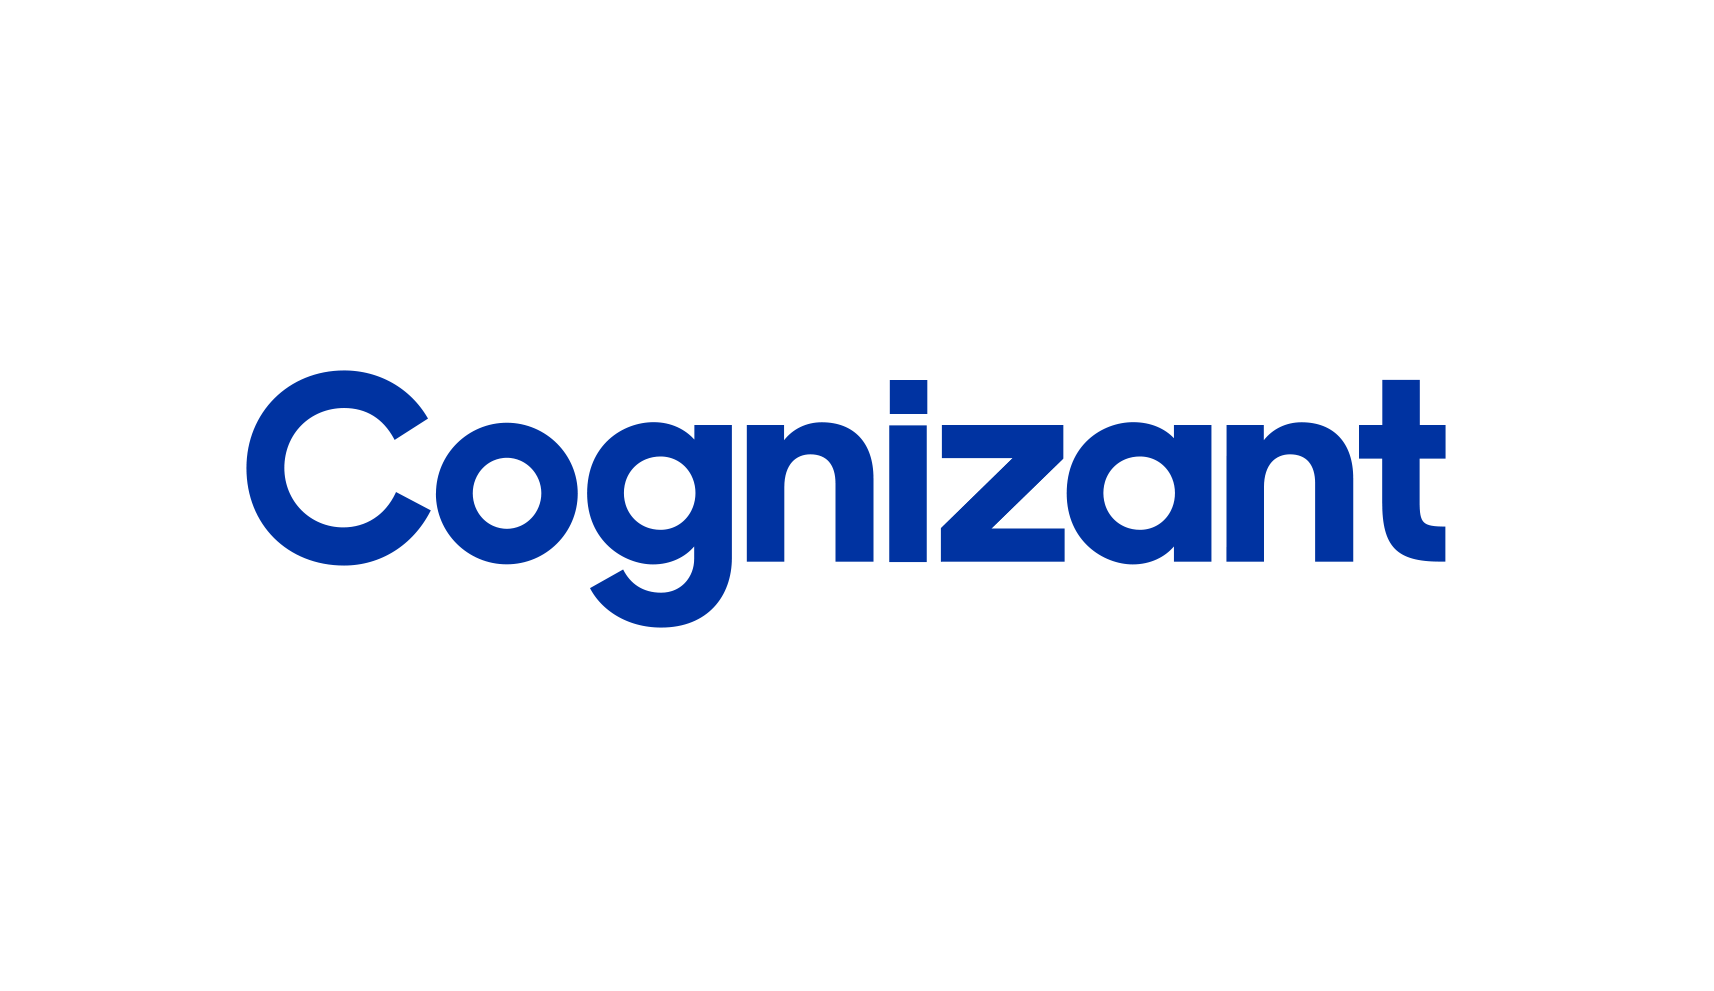 Cognizant training material tharpists that take caresource